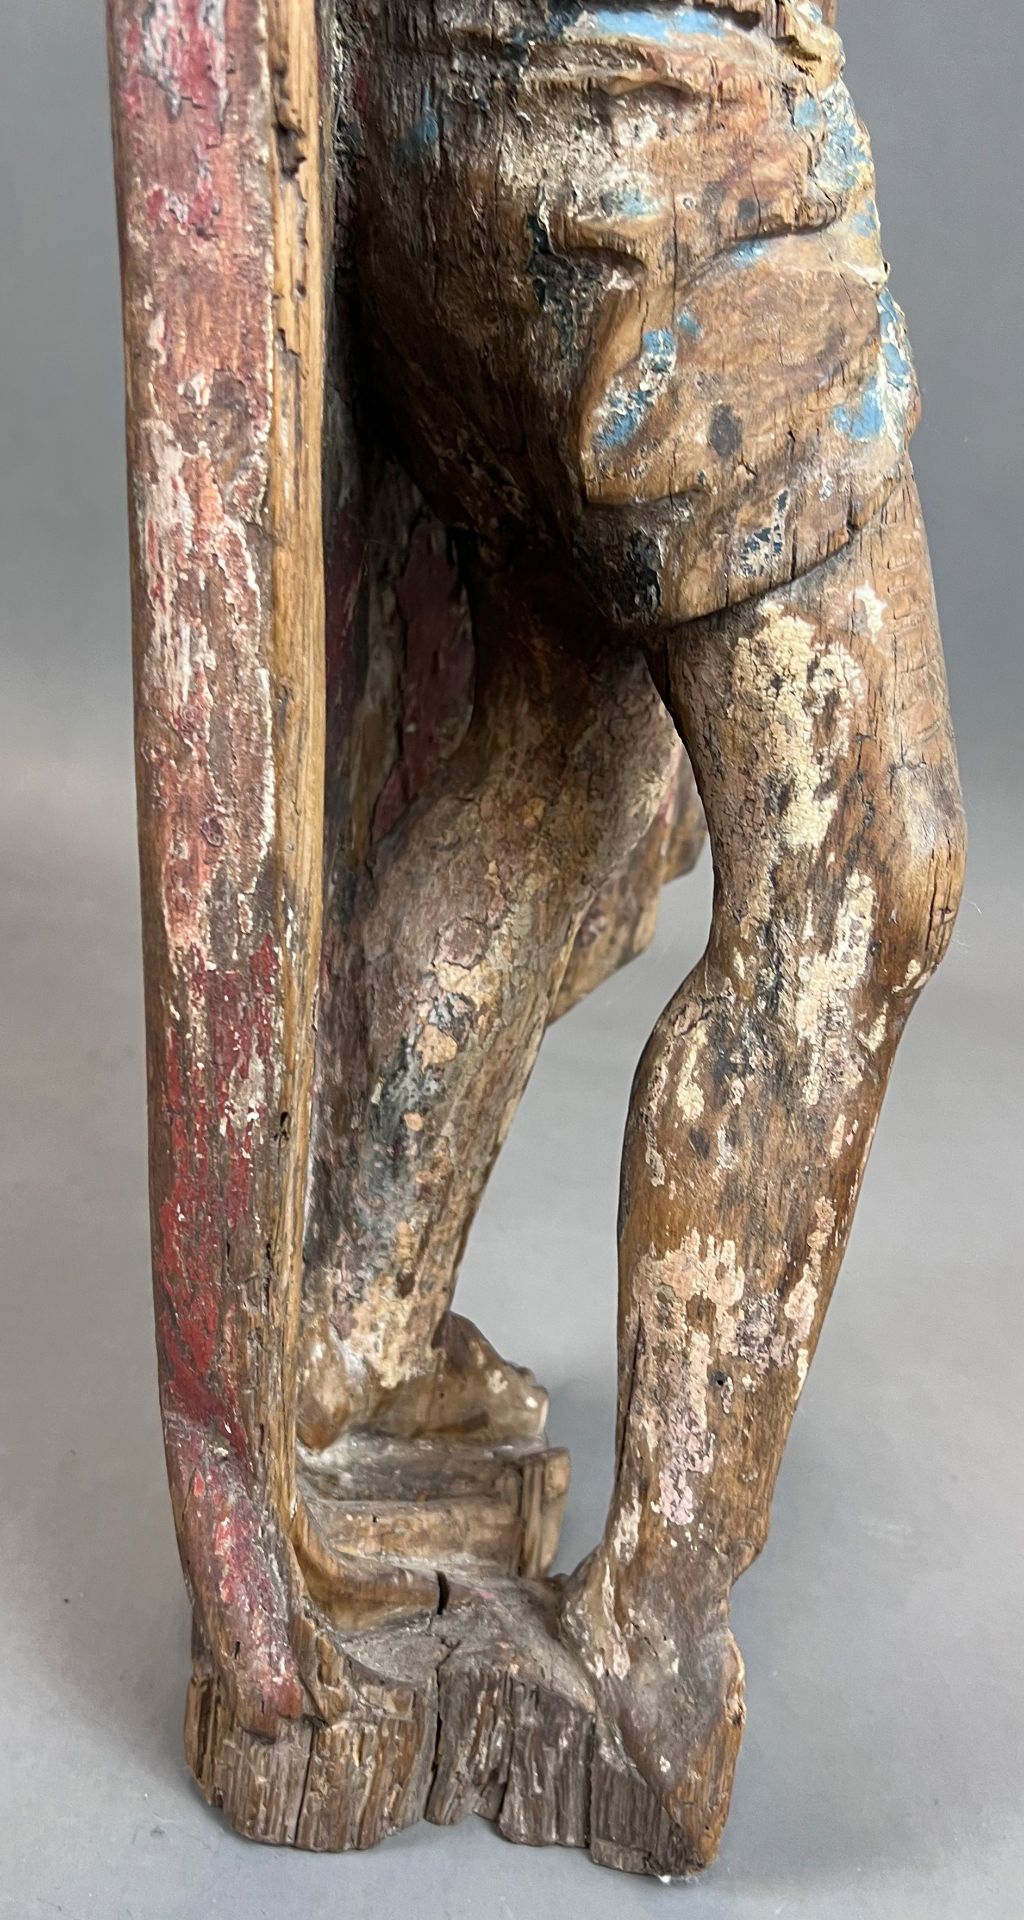 Wooden figure. Christ. Gothic style. Mid 15th century. Lower Rhine. - Image 10 of 15